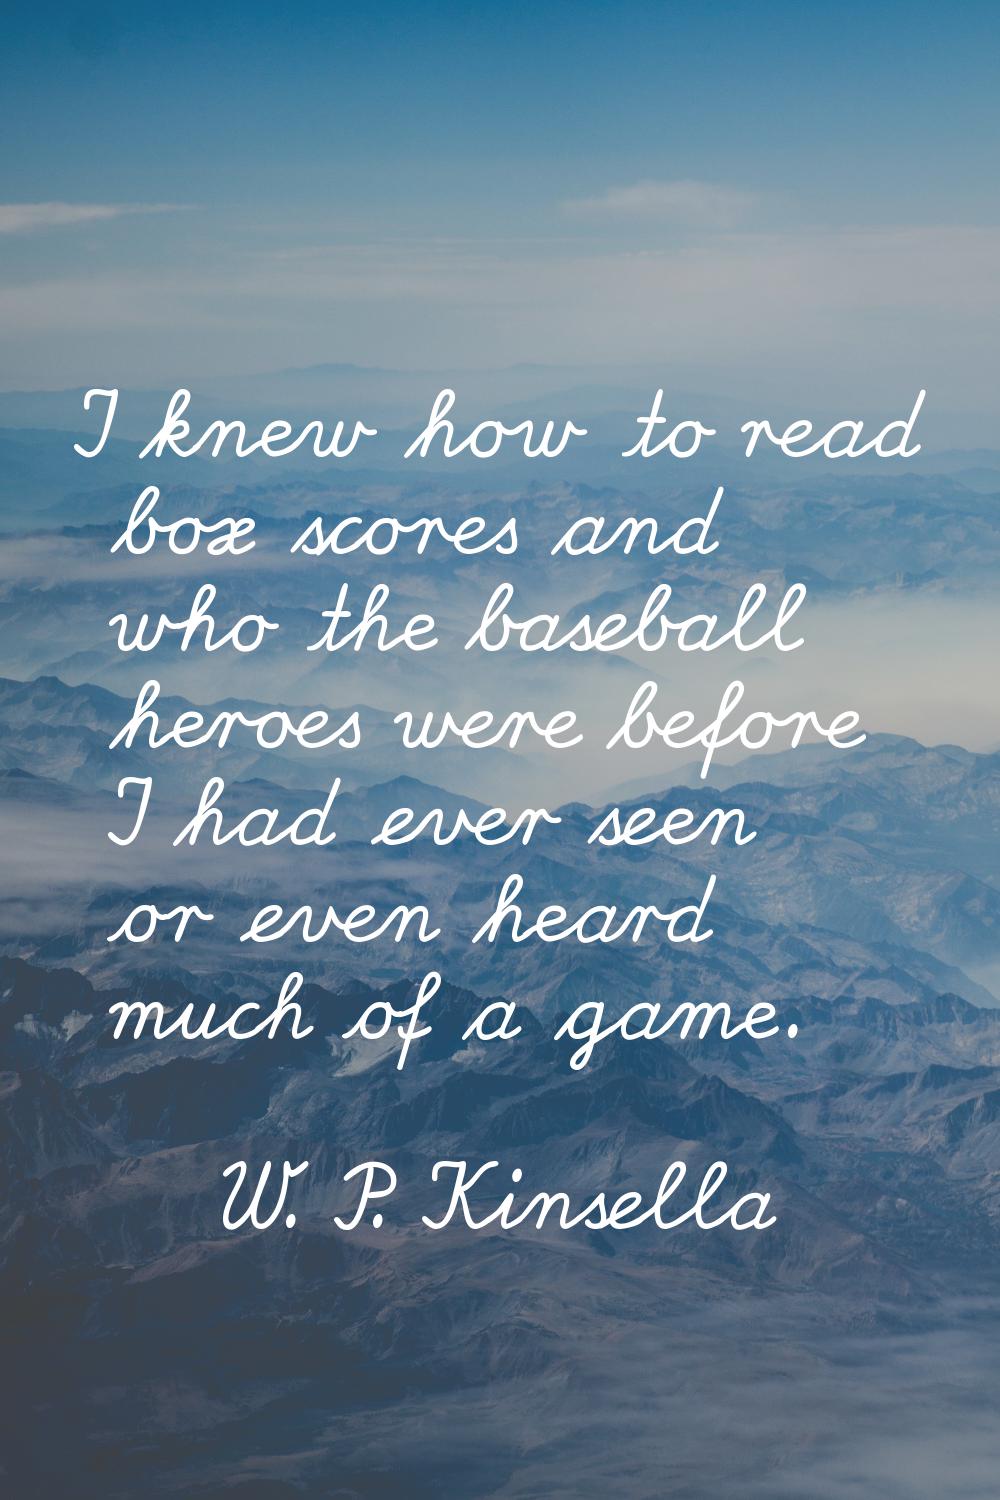 I knew how to read box scores and who the baseball heroes were before I had ever seen or even heard